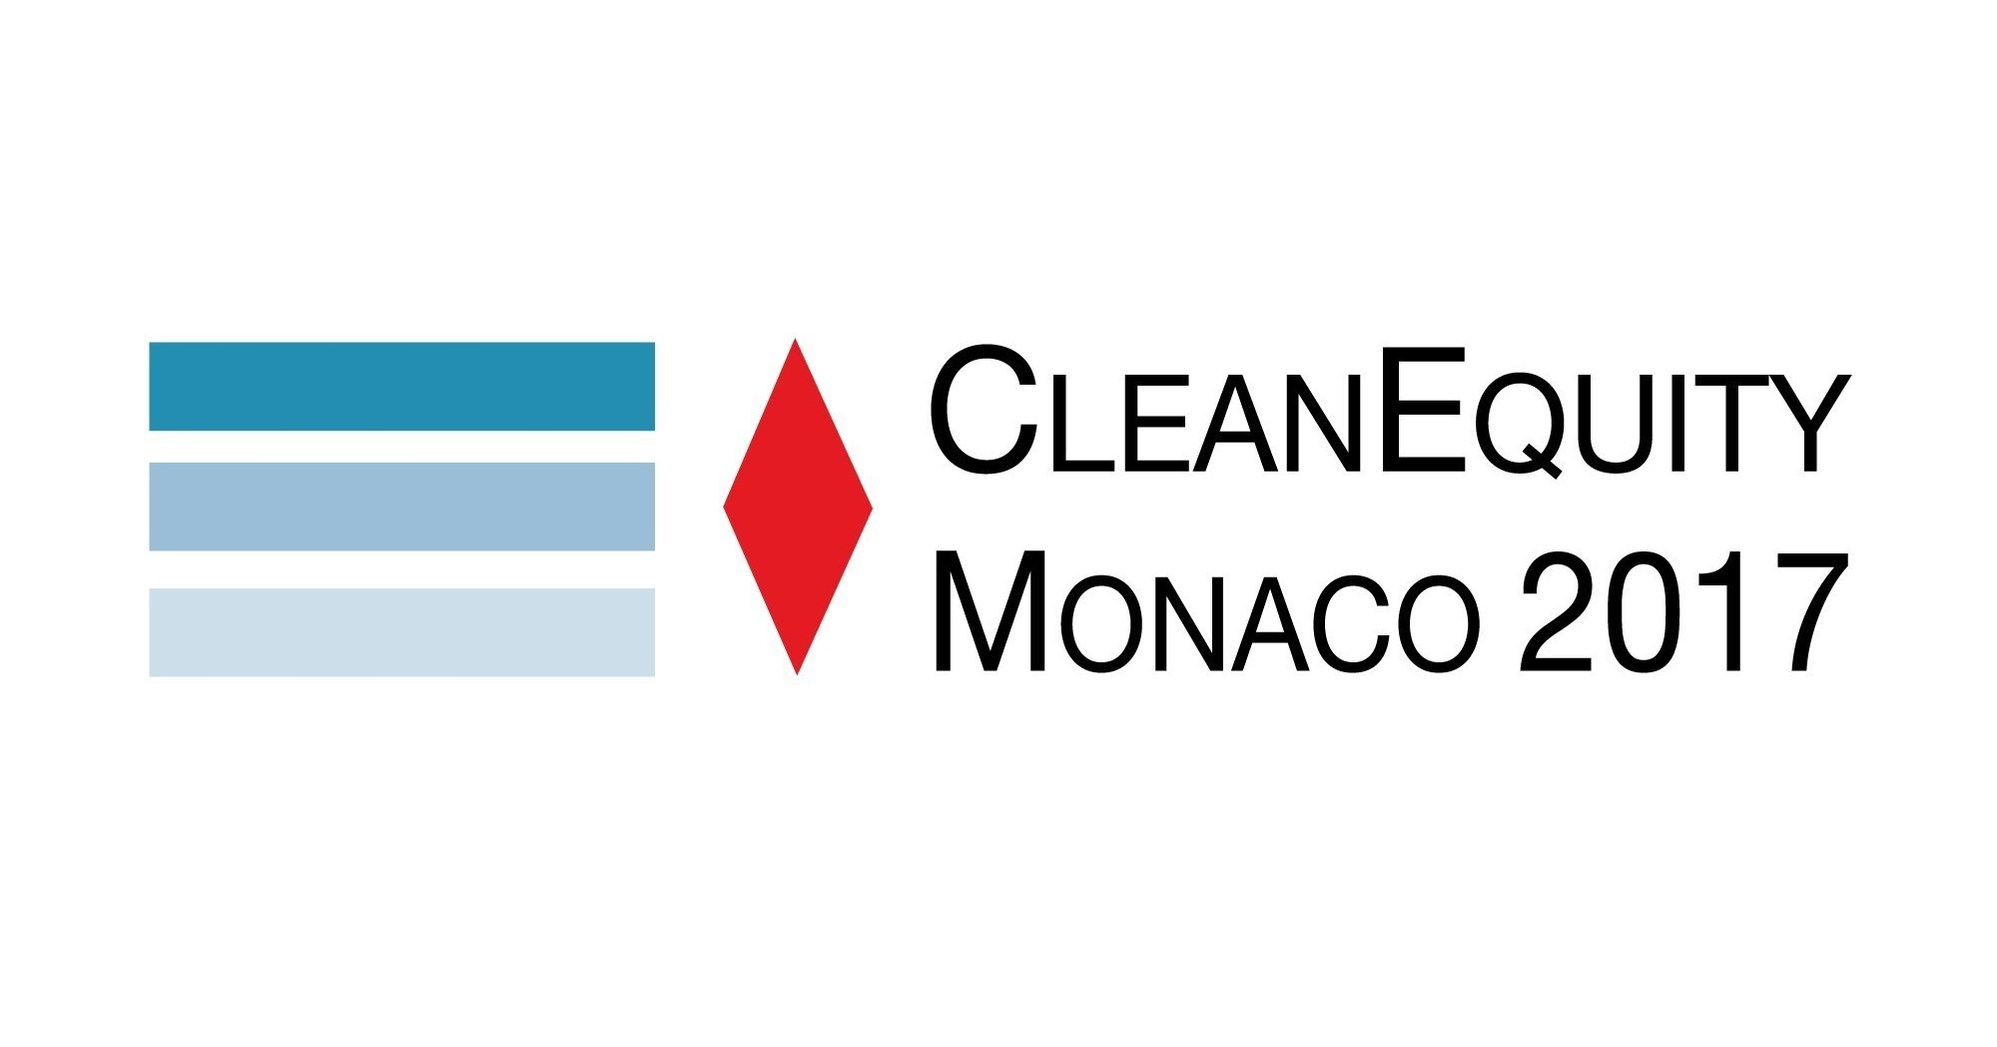 Pajarito Powder, LLC Selected to Present at CleanEquity Monaco ... - PR Newswire (press release)